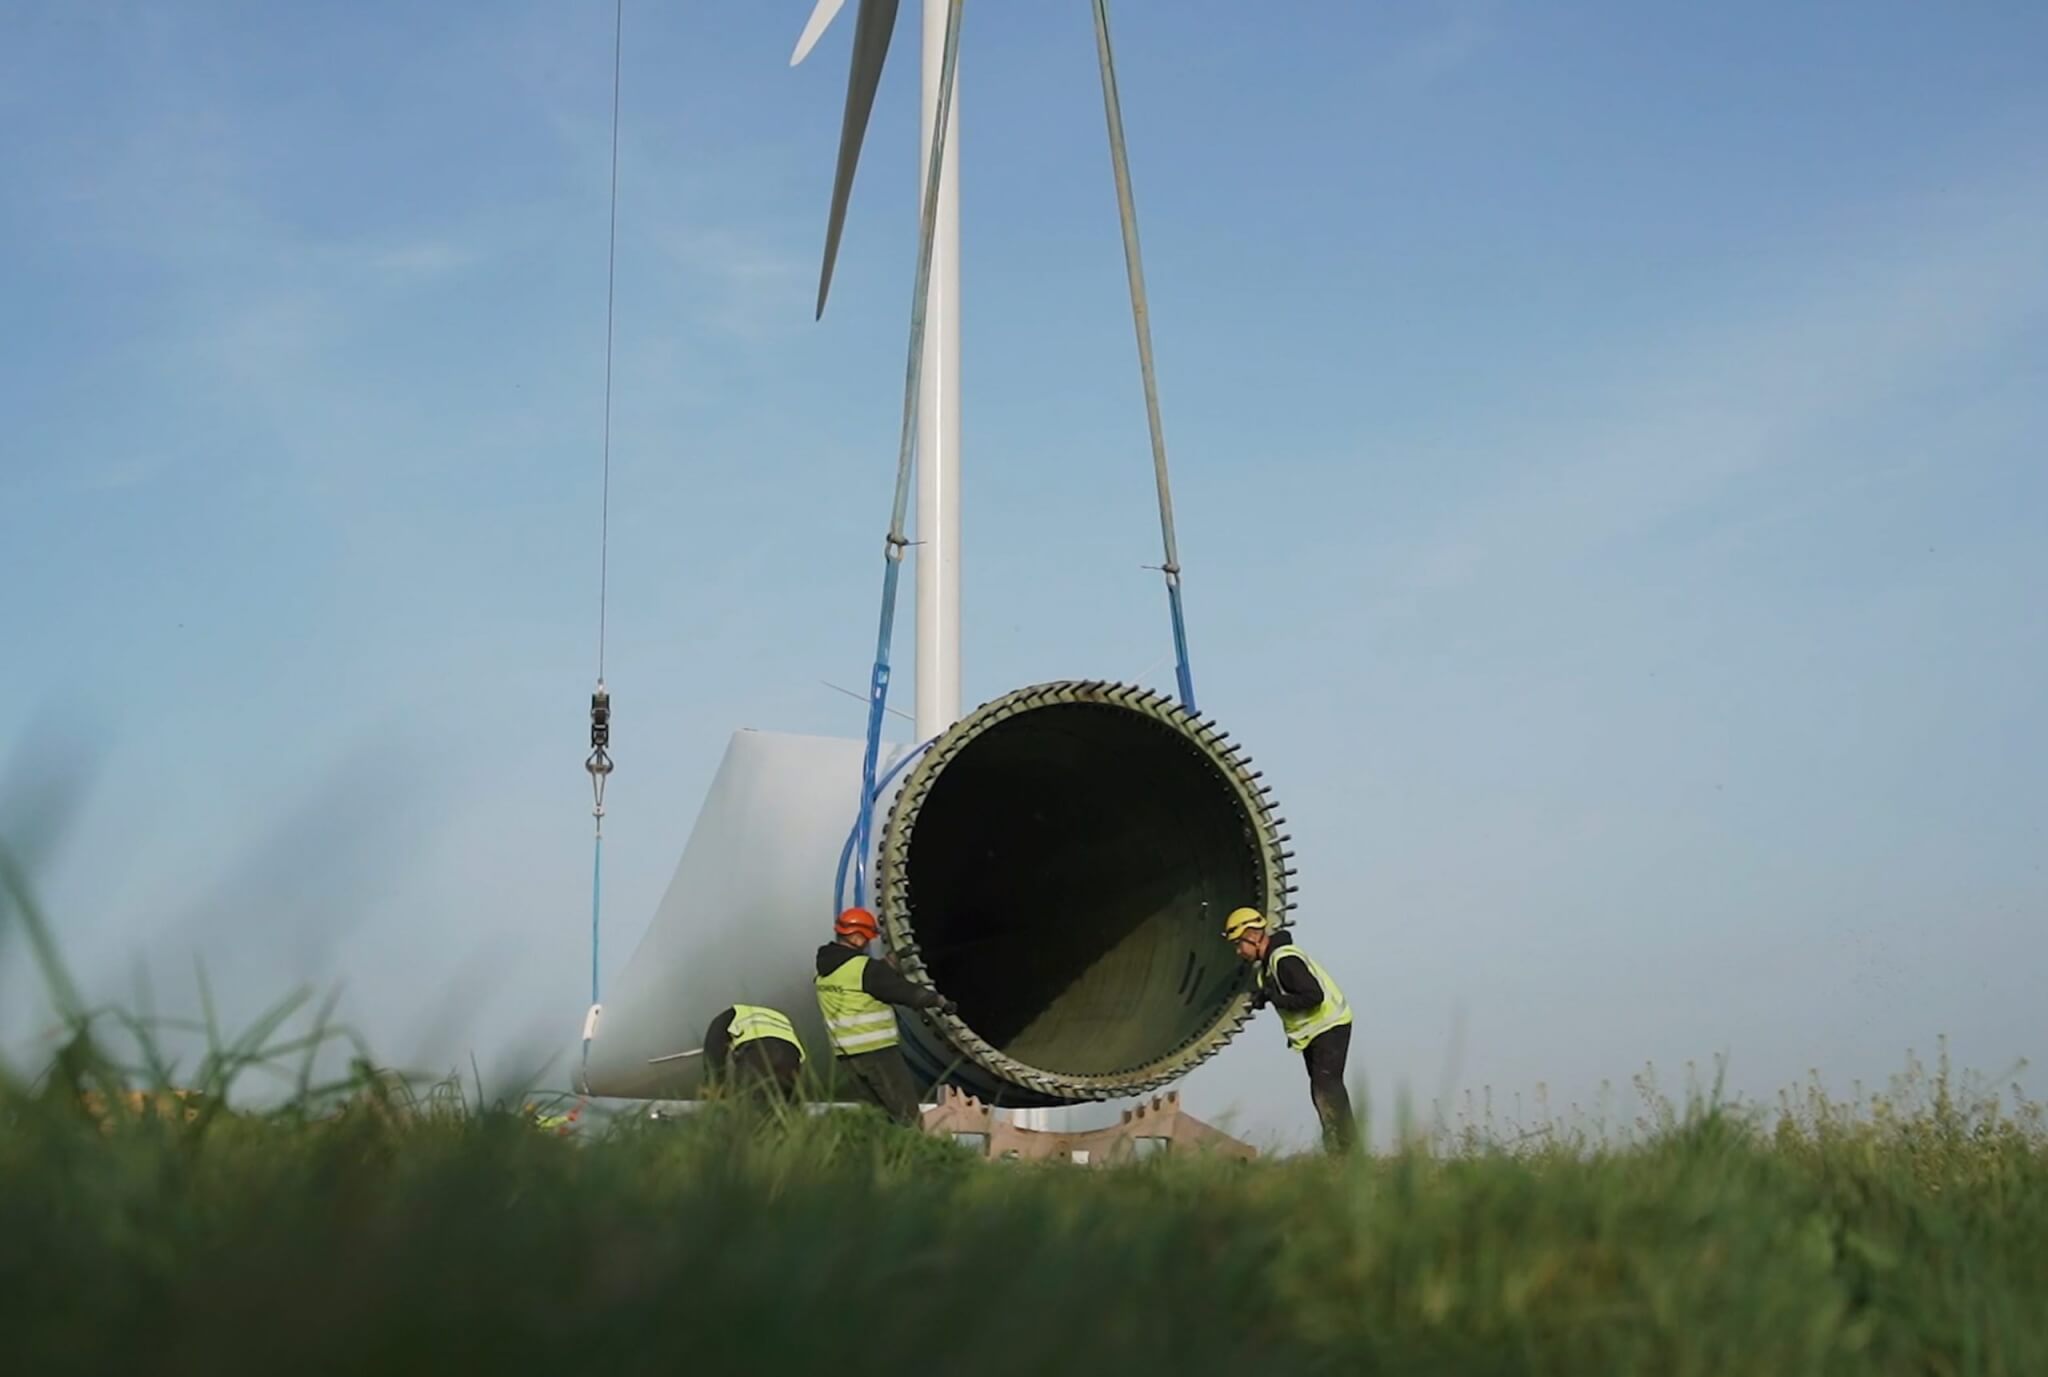 Rengineers has the in-house knowledge needed for full project realisation. From purchasing and disassembling existing wind turbines to giving used turbines a new lease of life. A prime example of sustainability and doughnut economy.